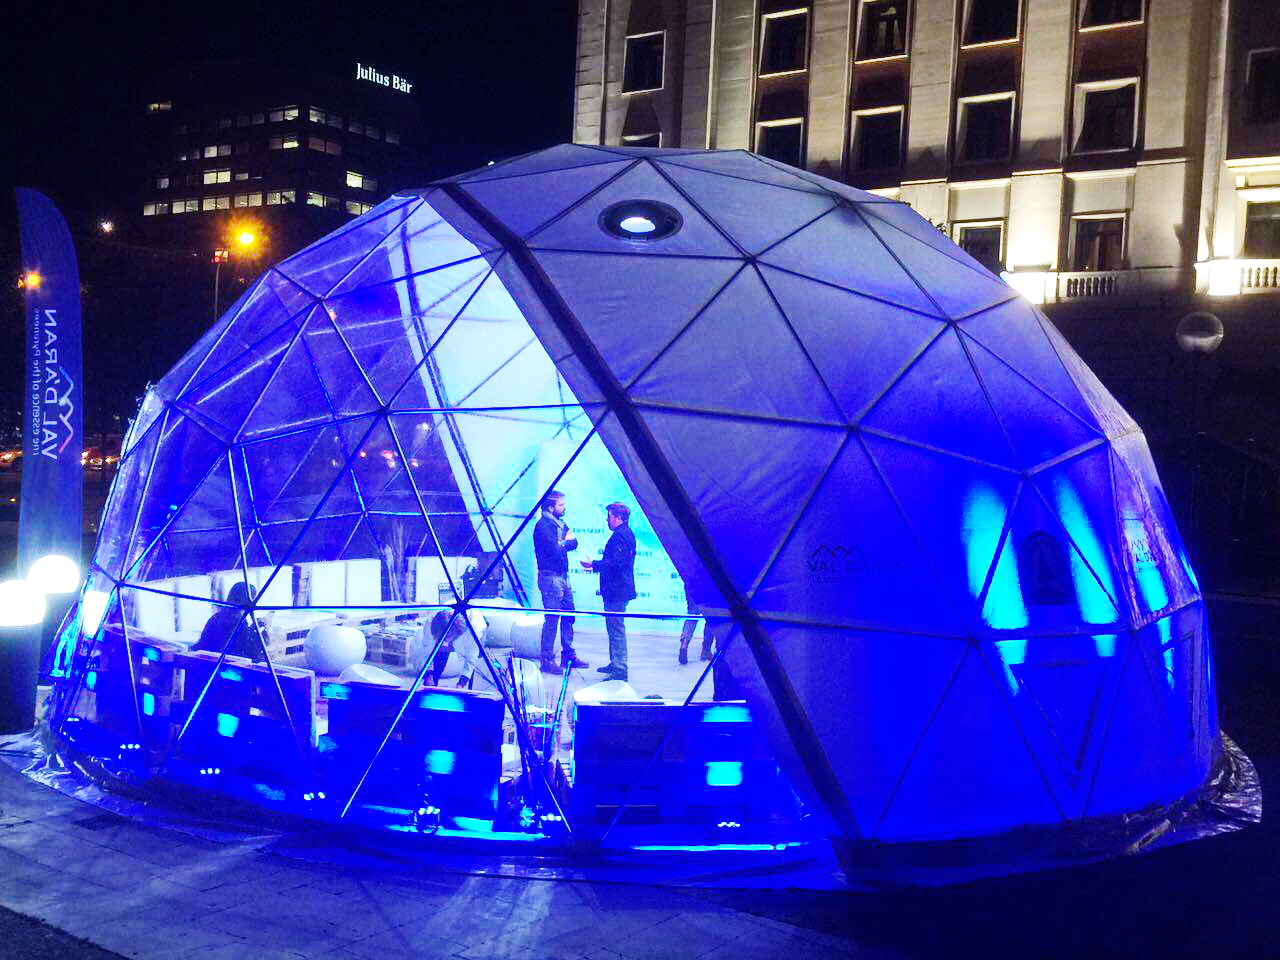 Portable Dome Ø8m for Baqueira Beret, The Largest Ski Resort in Spain